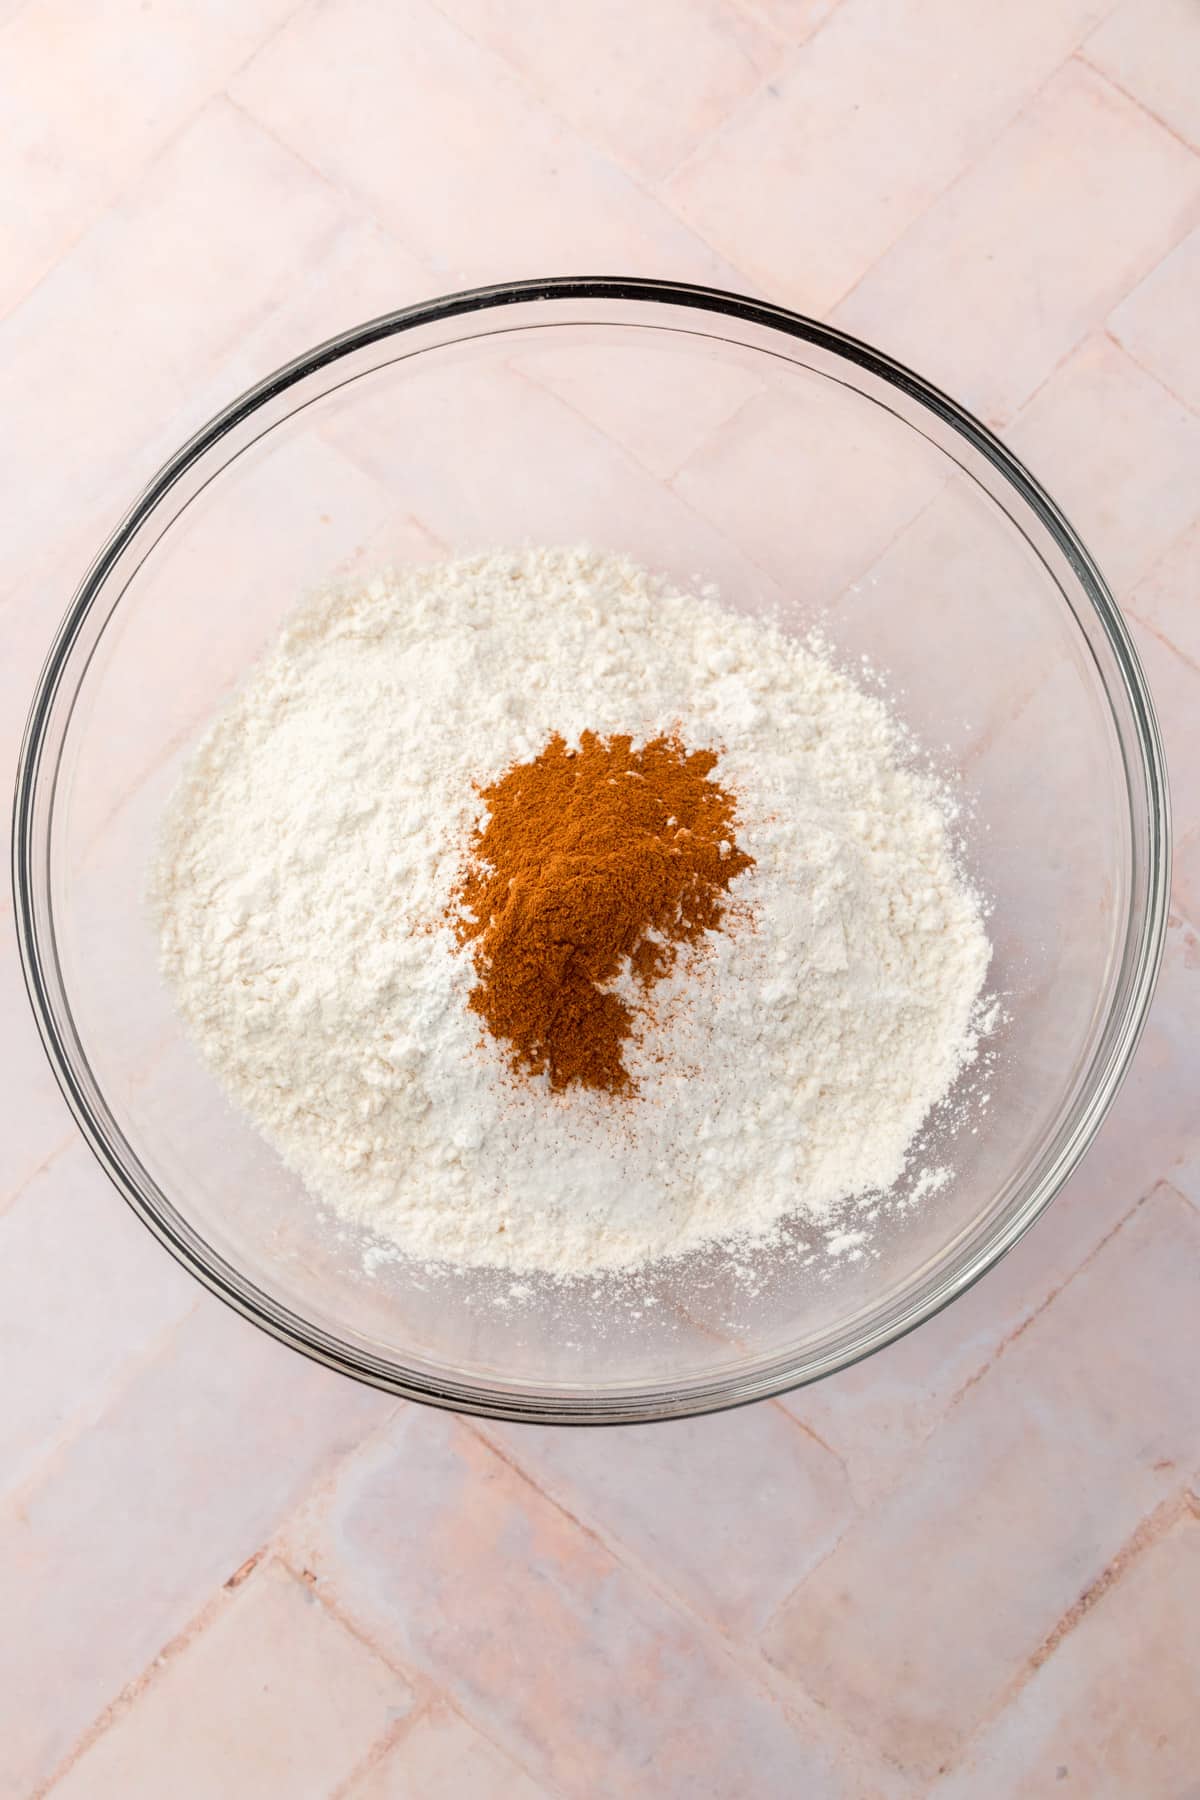 A glass mixing bowl with gluten-free flour, baking soda, baking powder, salt and cinnamon before mixing together.